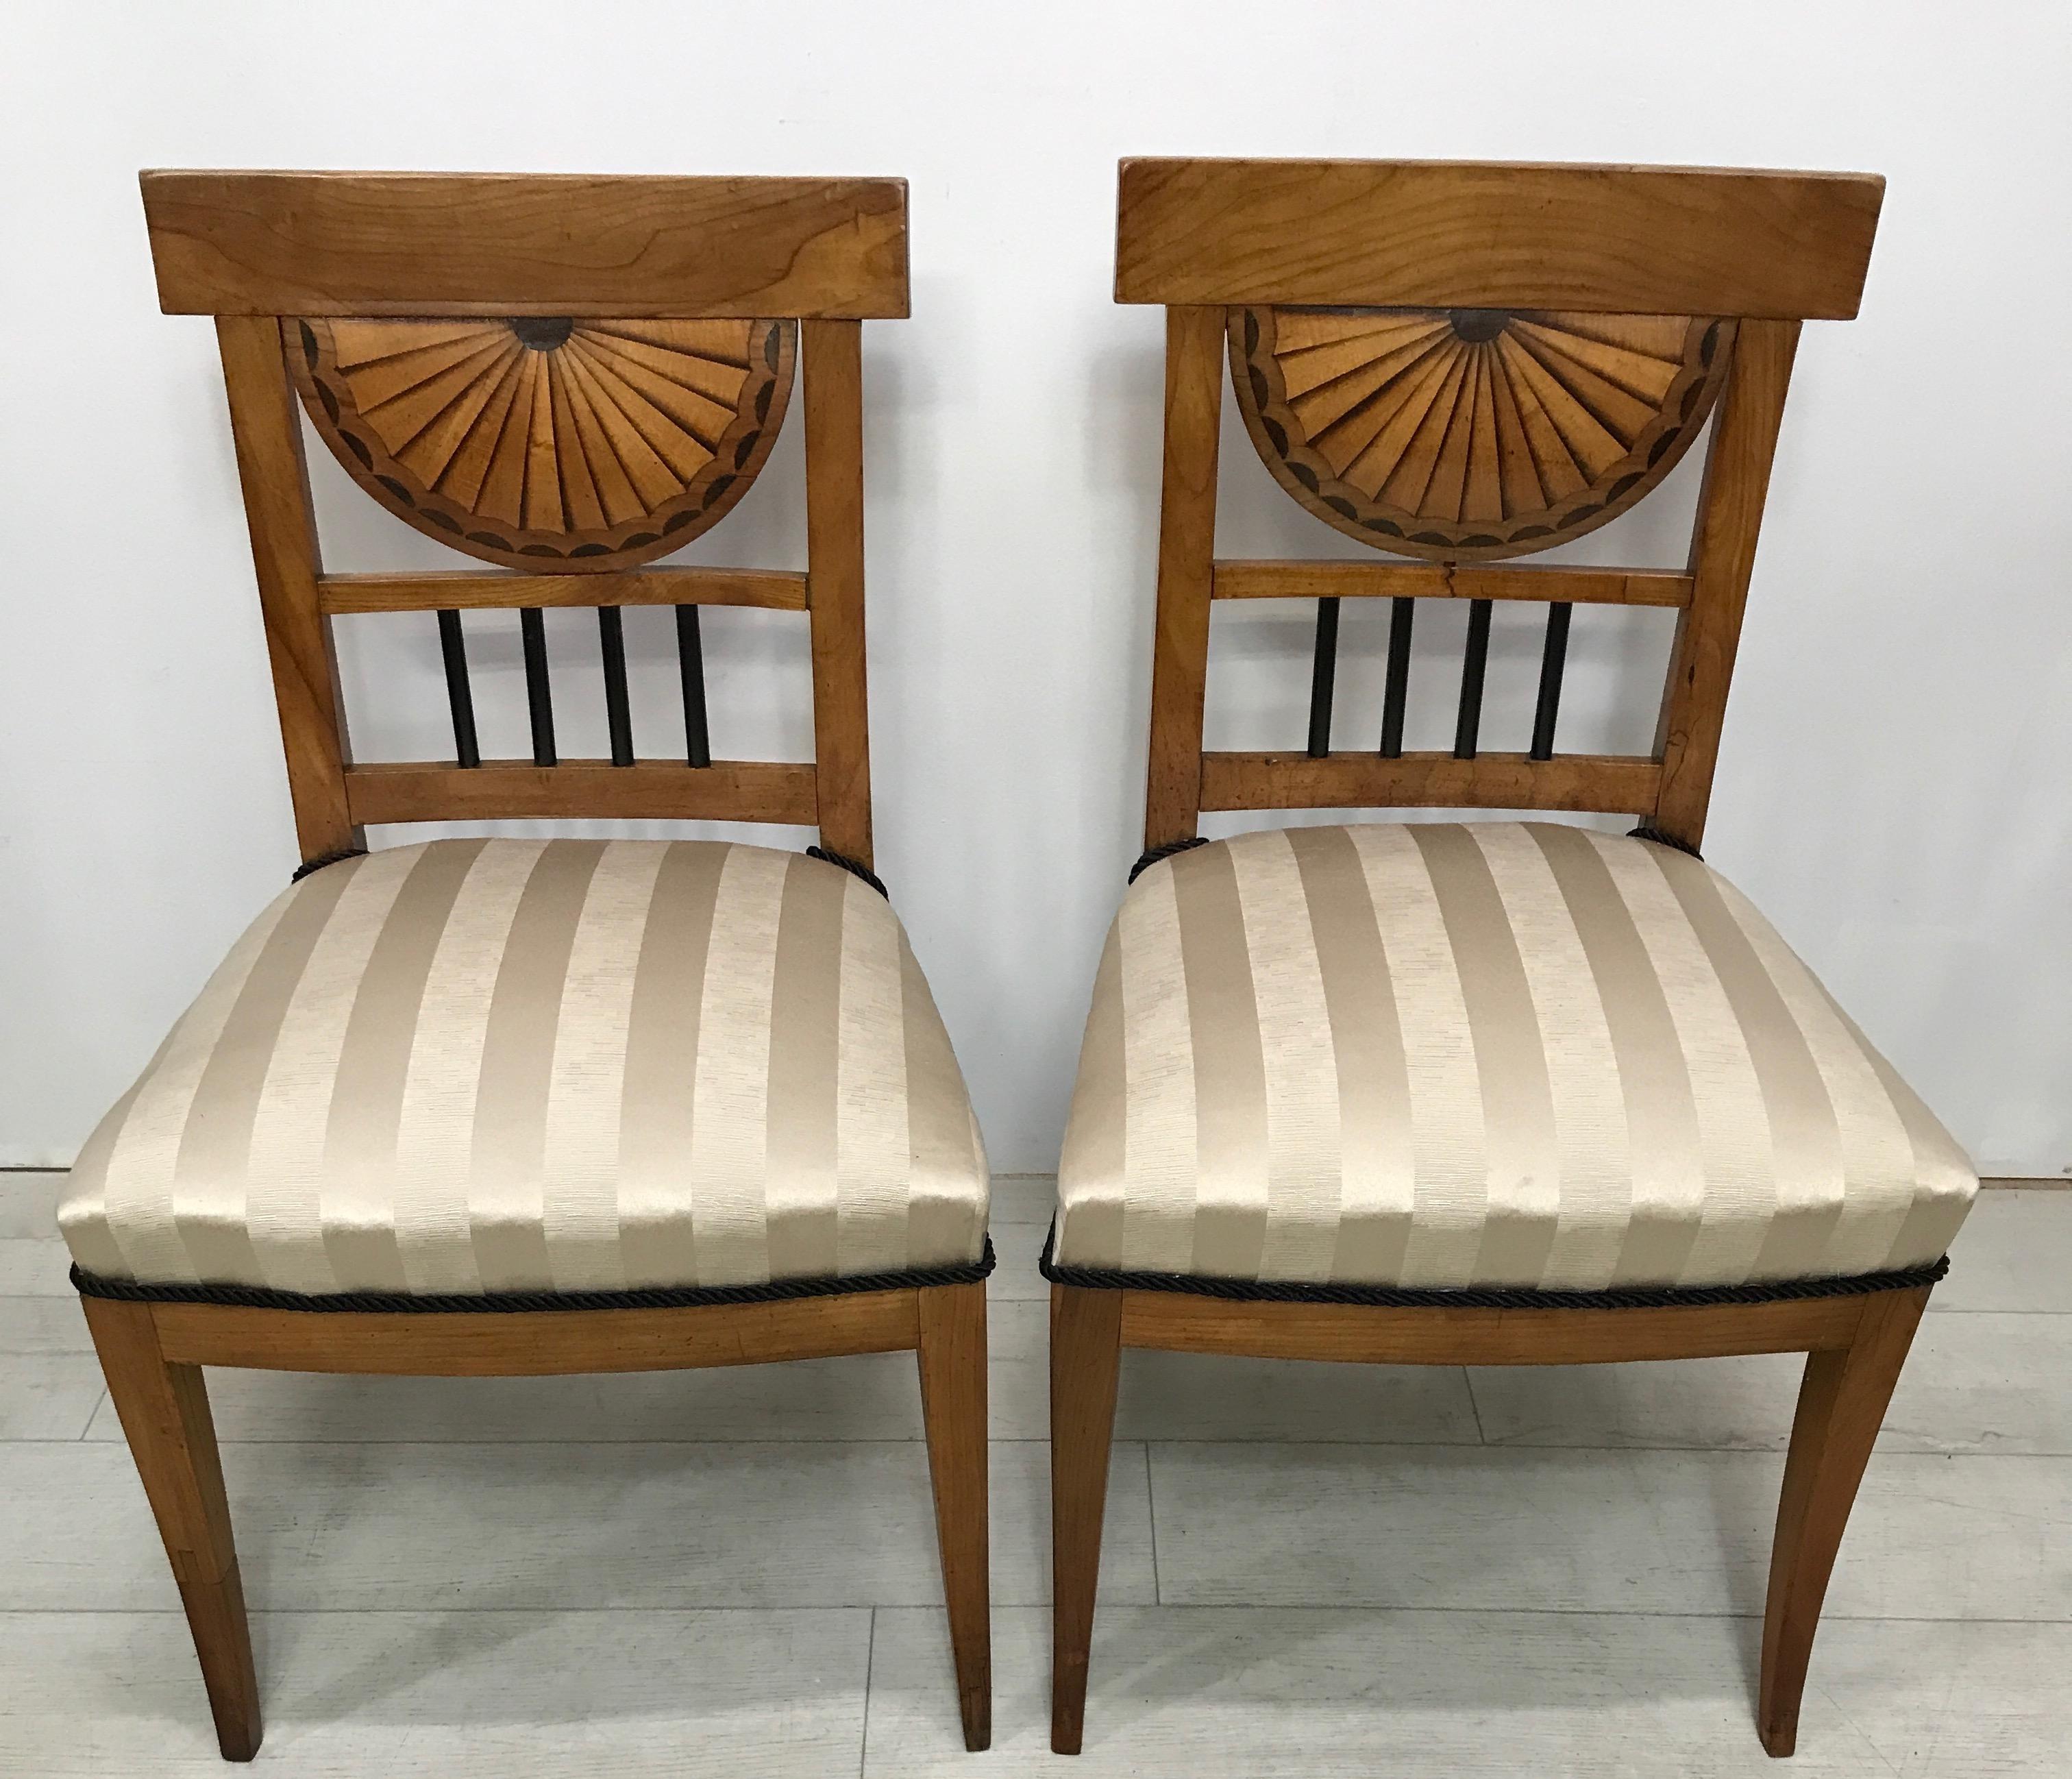 Inlay Pair of Cherrywood Biedermeier Side Chairs, European Early 19th Century For Sale